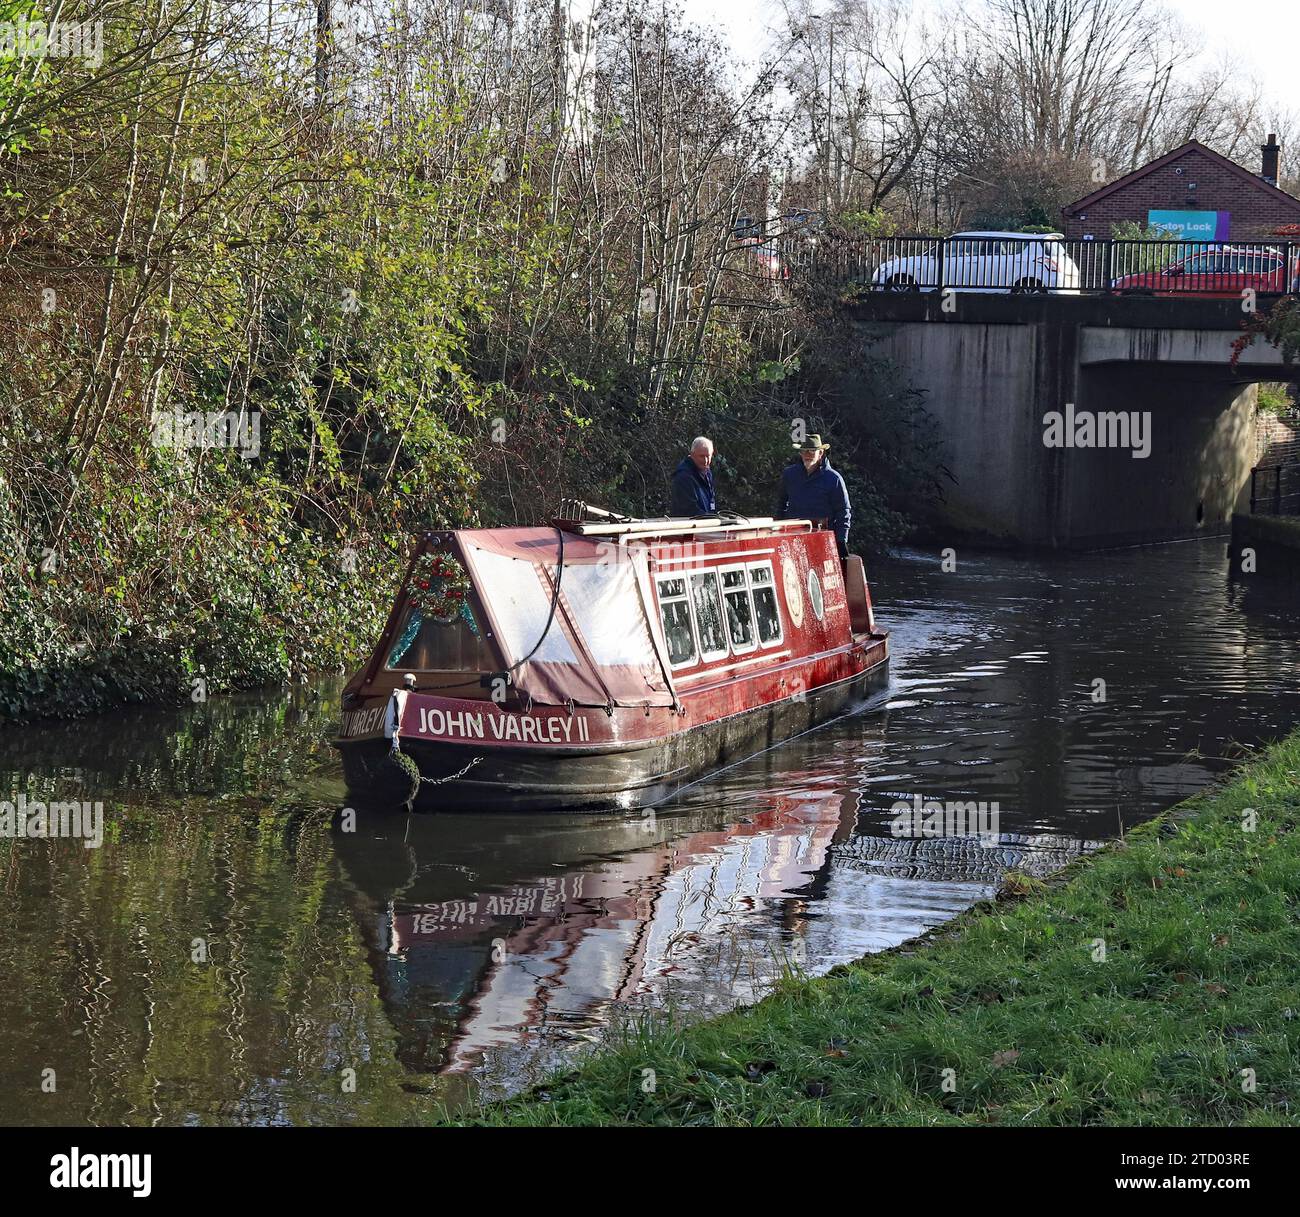 Santa cruises along the Chesterfield canal, the “John Varley II”, adorned with a Christmas wreath is on a cruise with Father Christmas aboard. Stock Photo